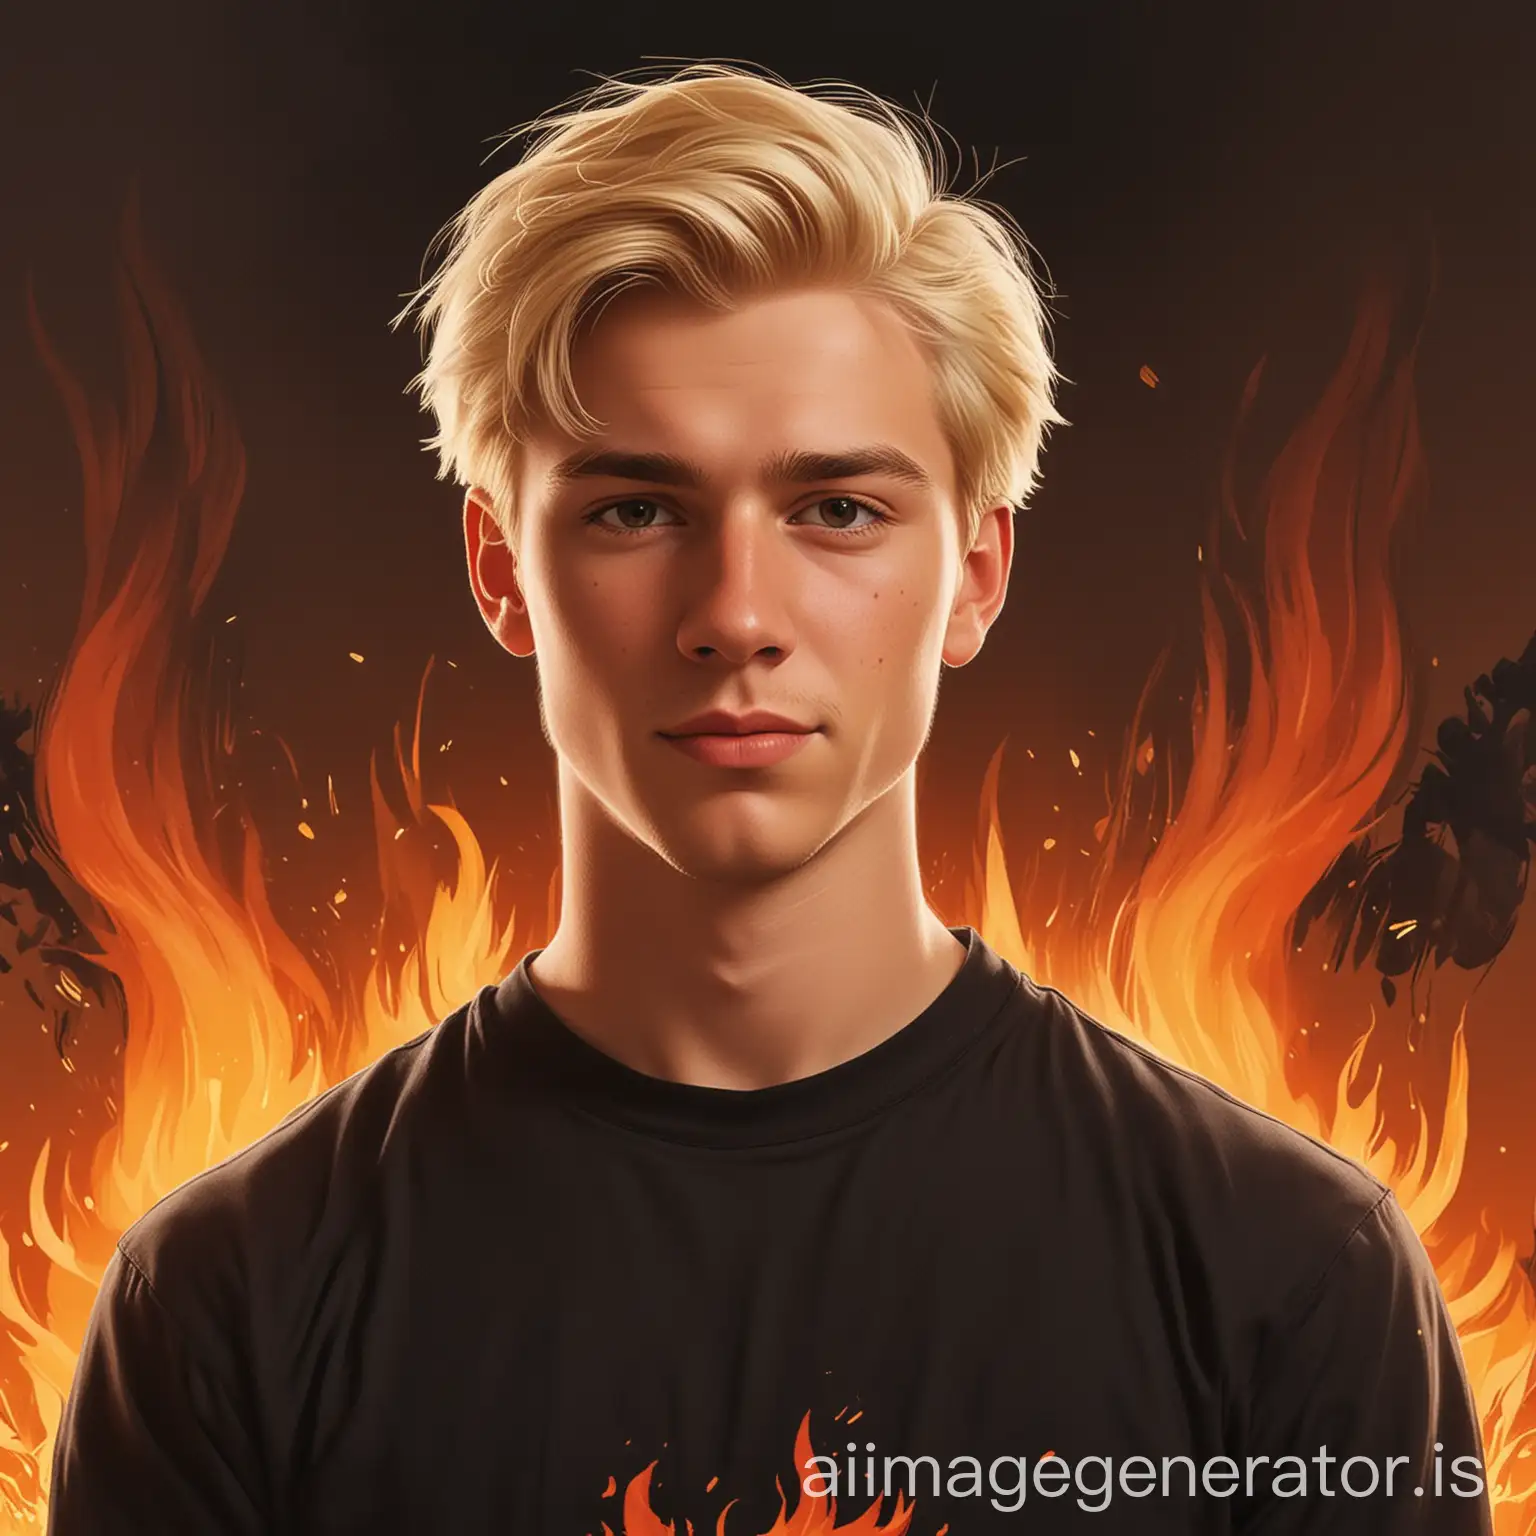 A cartoon of a 22-year-old Caucasian man with blond hair, wearing a black shirt, with a fire background in nature